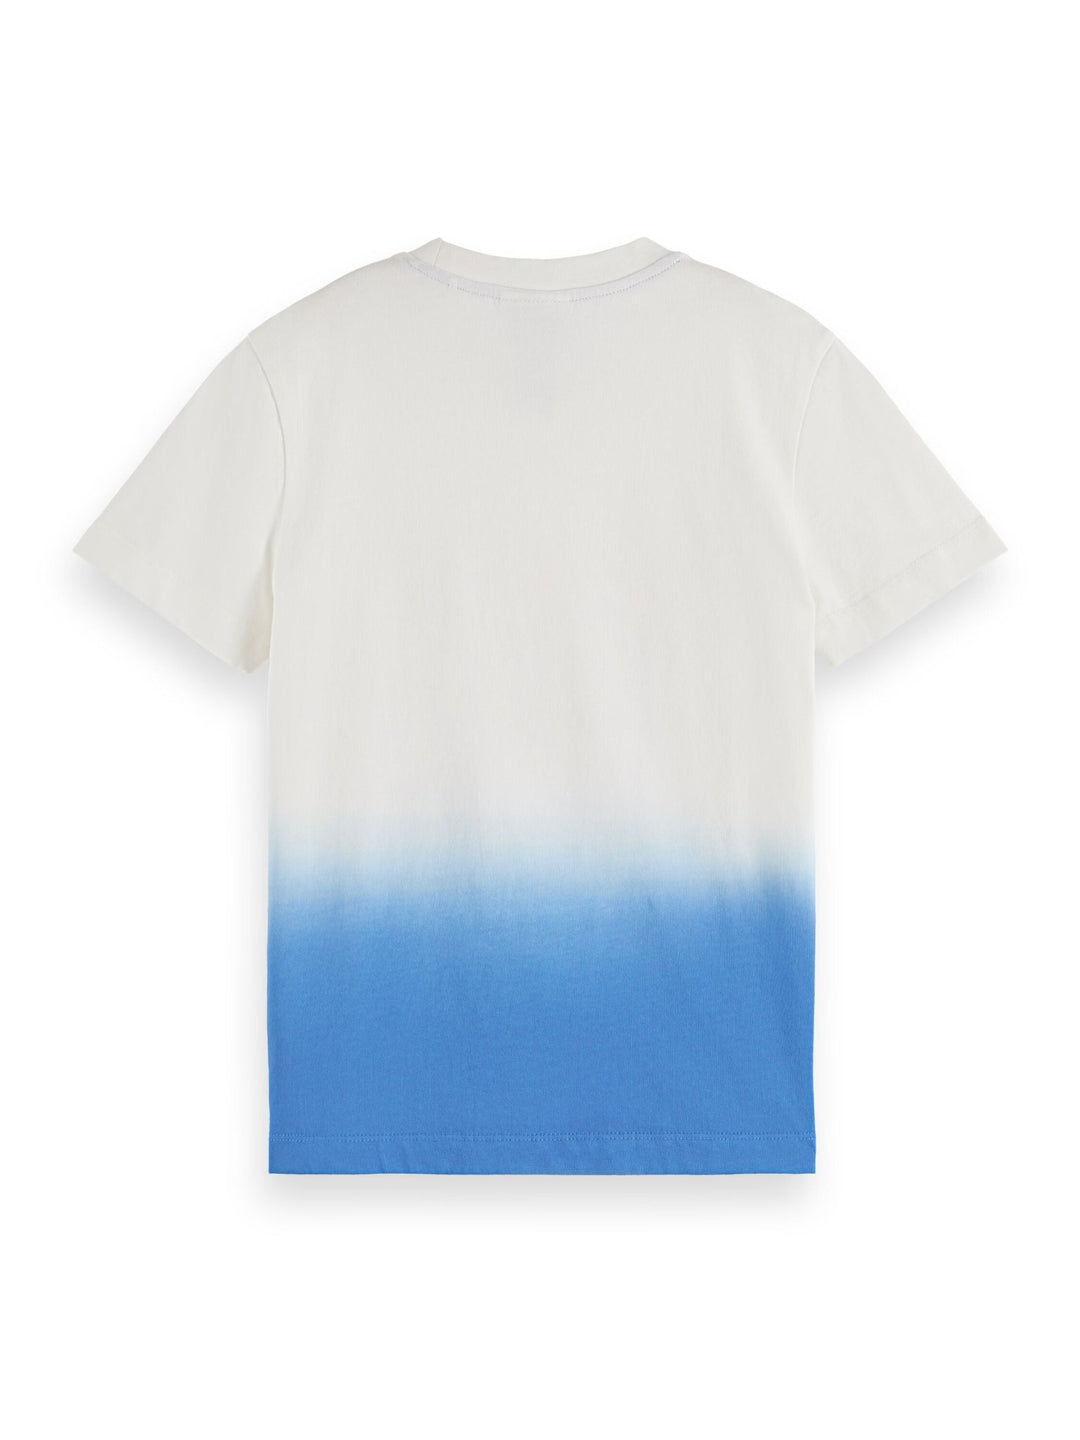 Relaxed Fit Artwork Dip Dyed T-Shirt - Off White - Posh New York